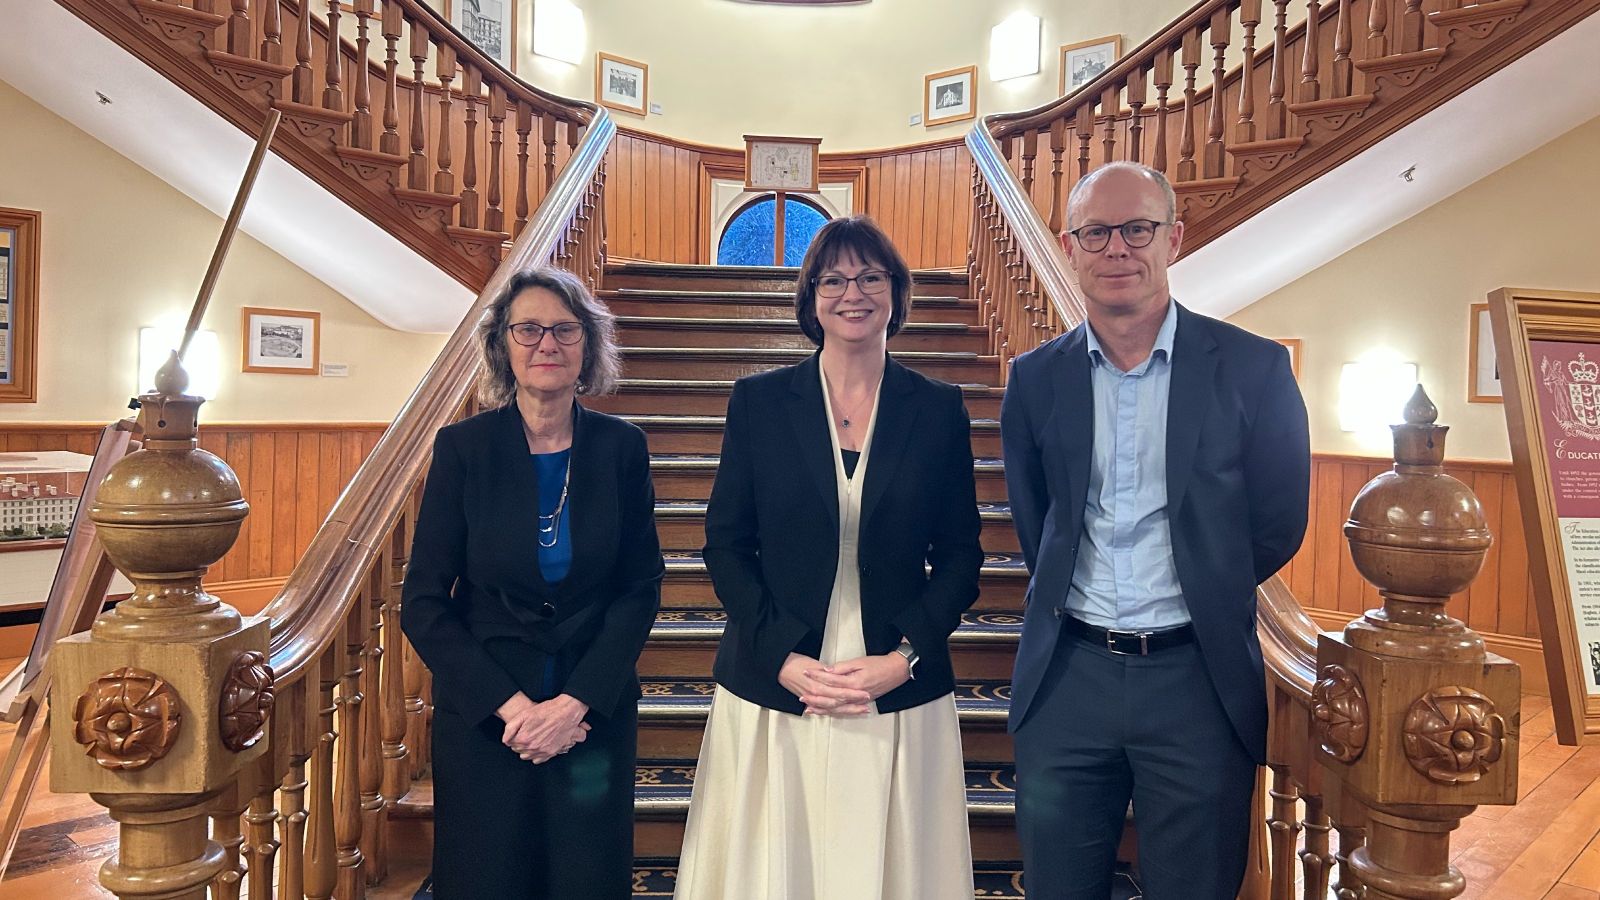 Three professionally dressed academics standing in front of a wooden staircase.